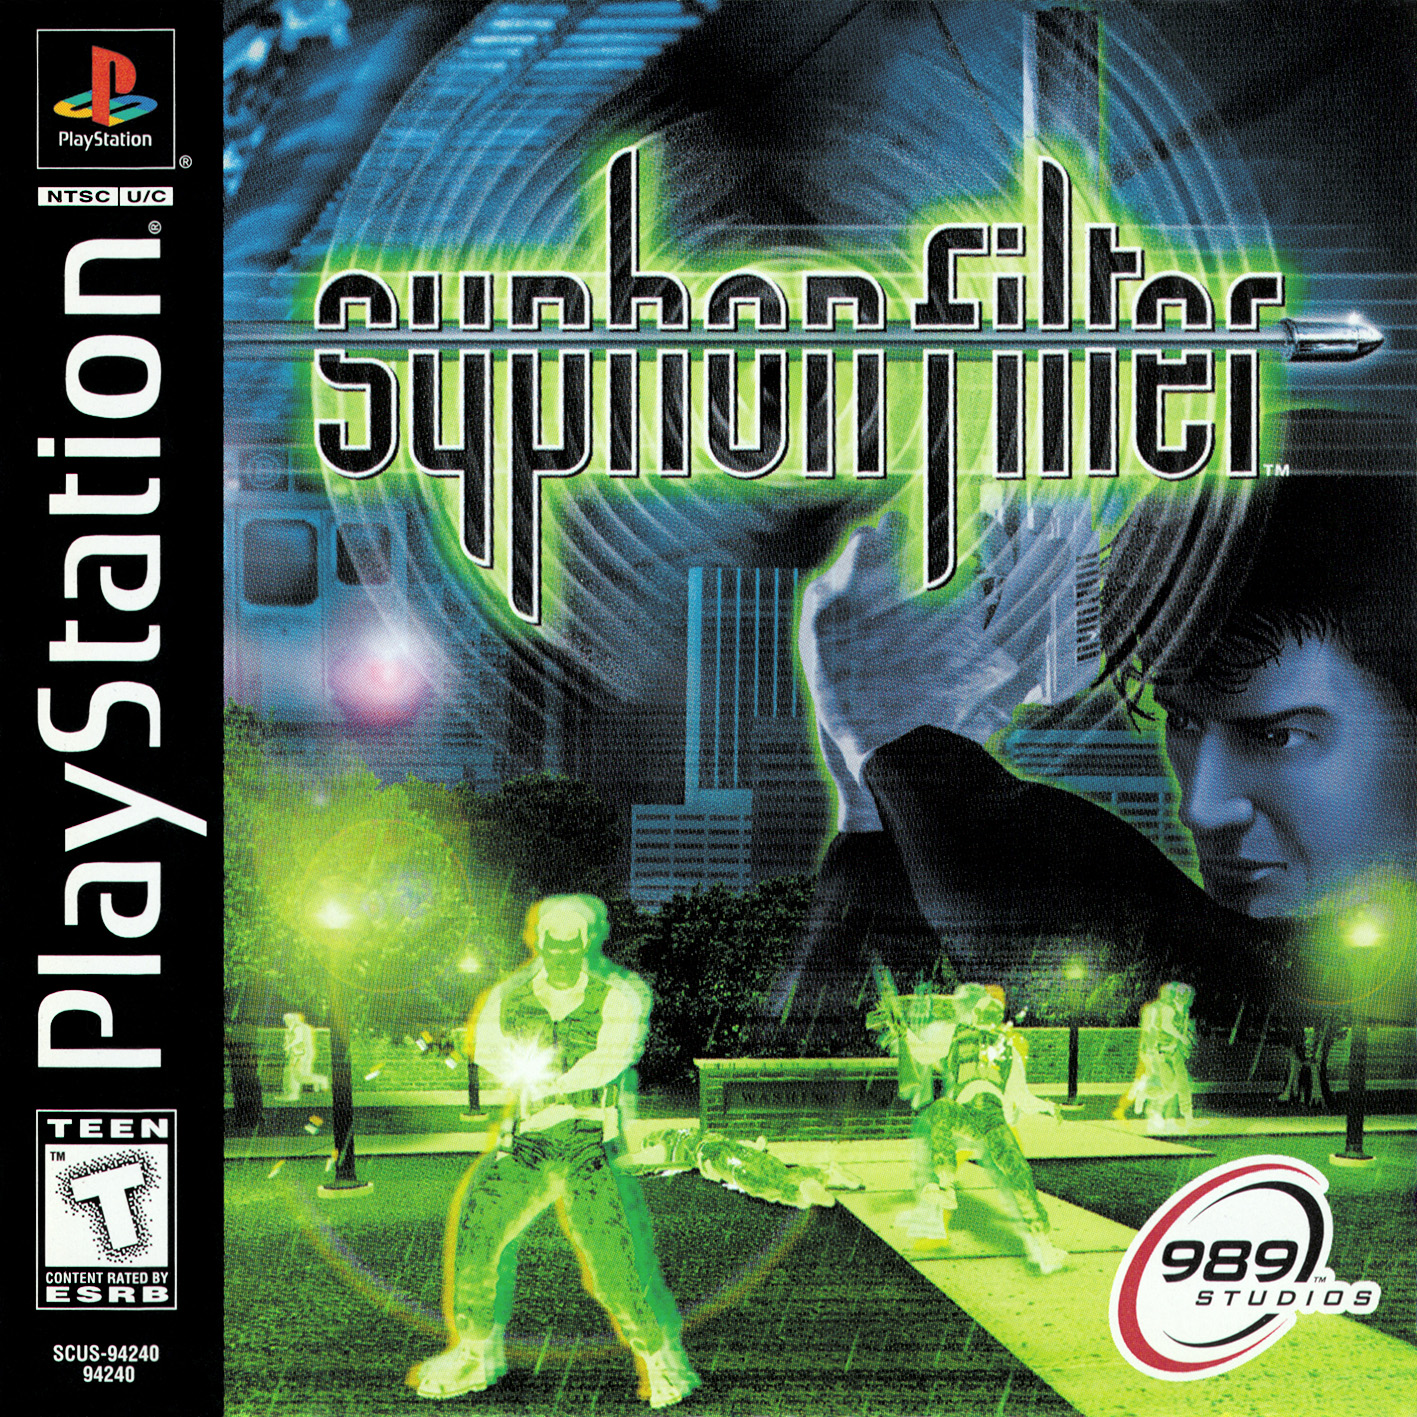 Syphon Filter The Omega Strain - Retro Games, Vintage Consoles